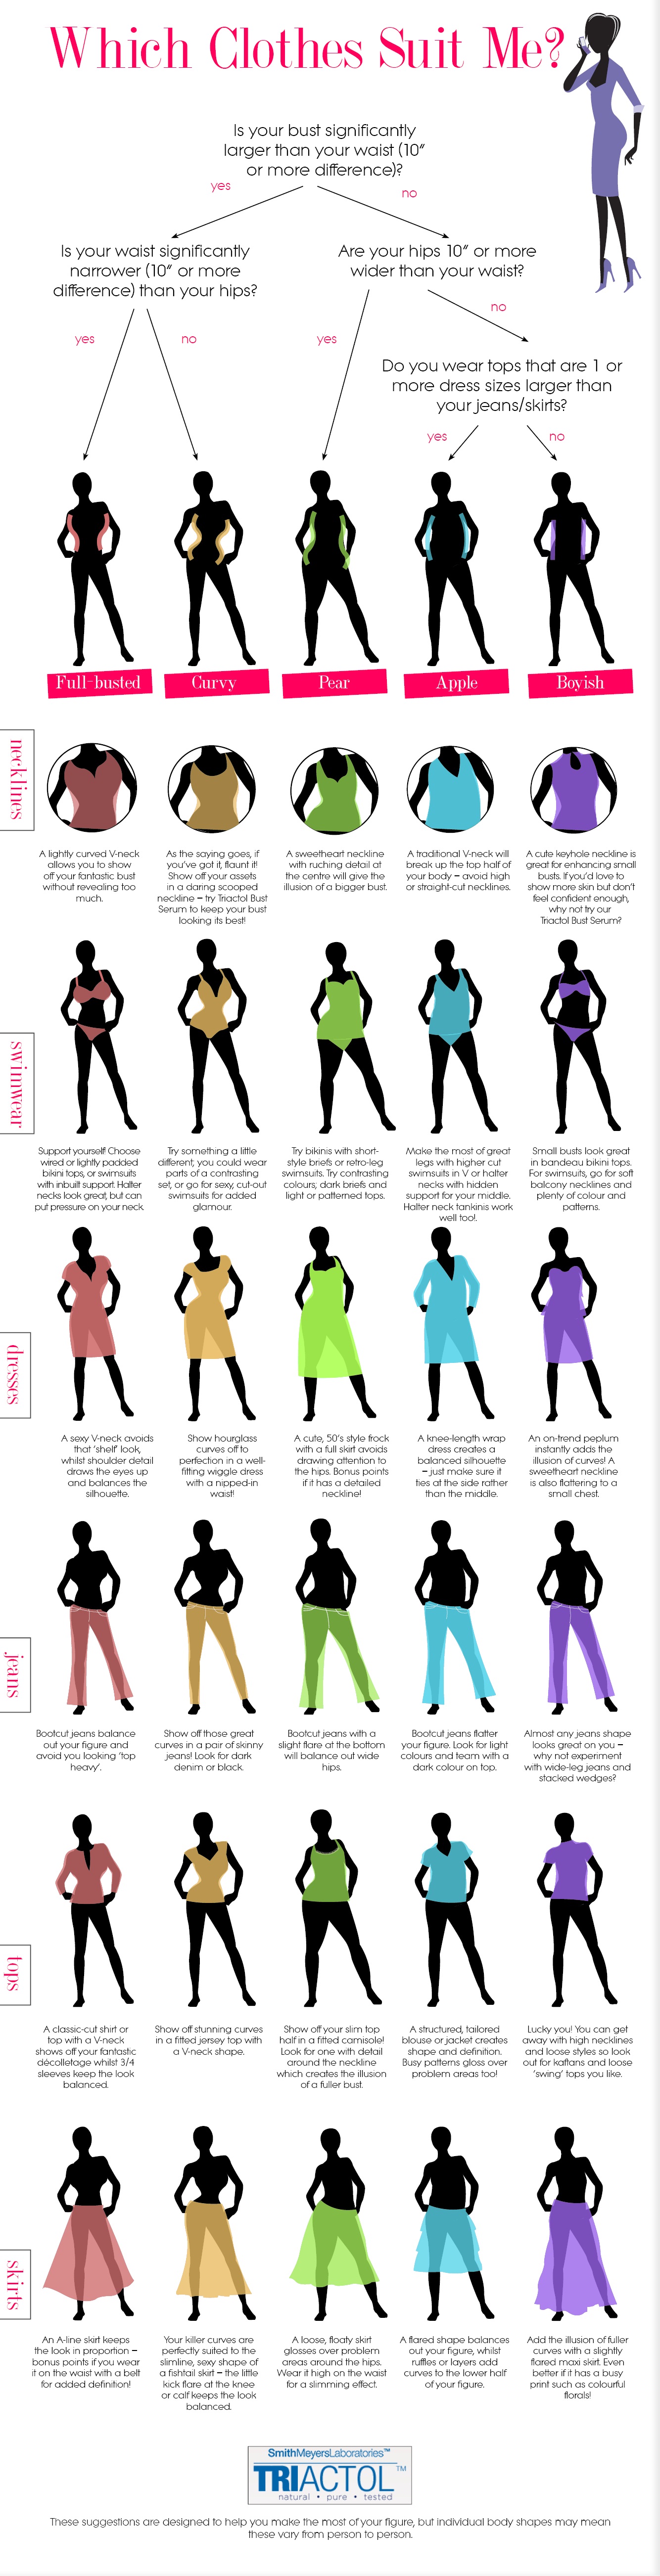 A Guide To Women's Clothing Based On Body Type